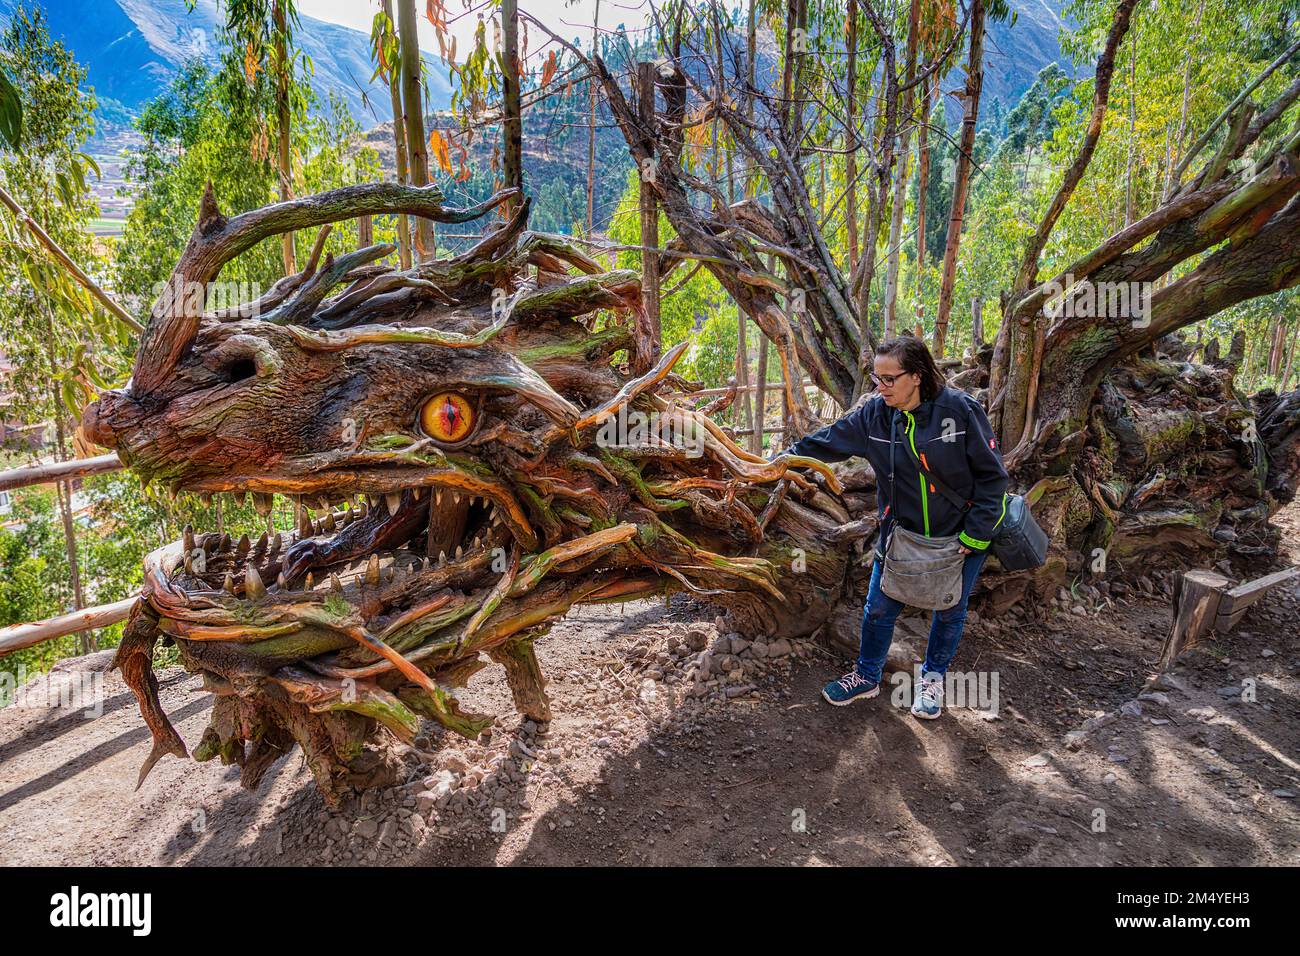 Cusco, Peru - September 26, 2022: Characters from Lord of the Rings have been created from trees and wood at Bosque ENTS Cusco, a new attraction for t Stock Photo